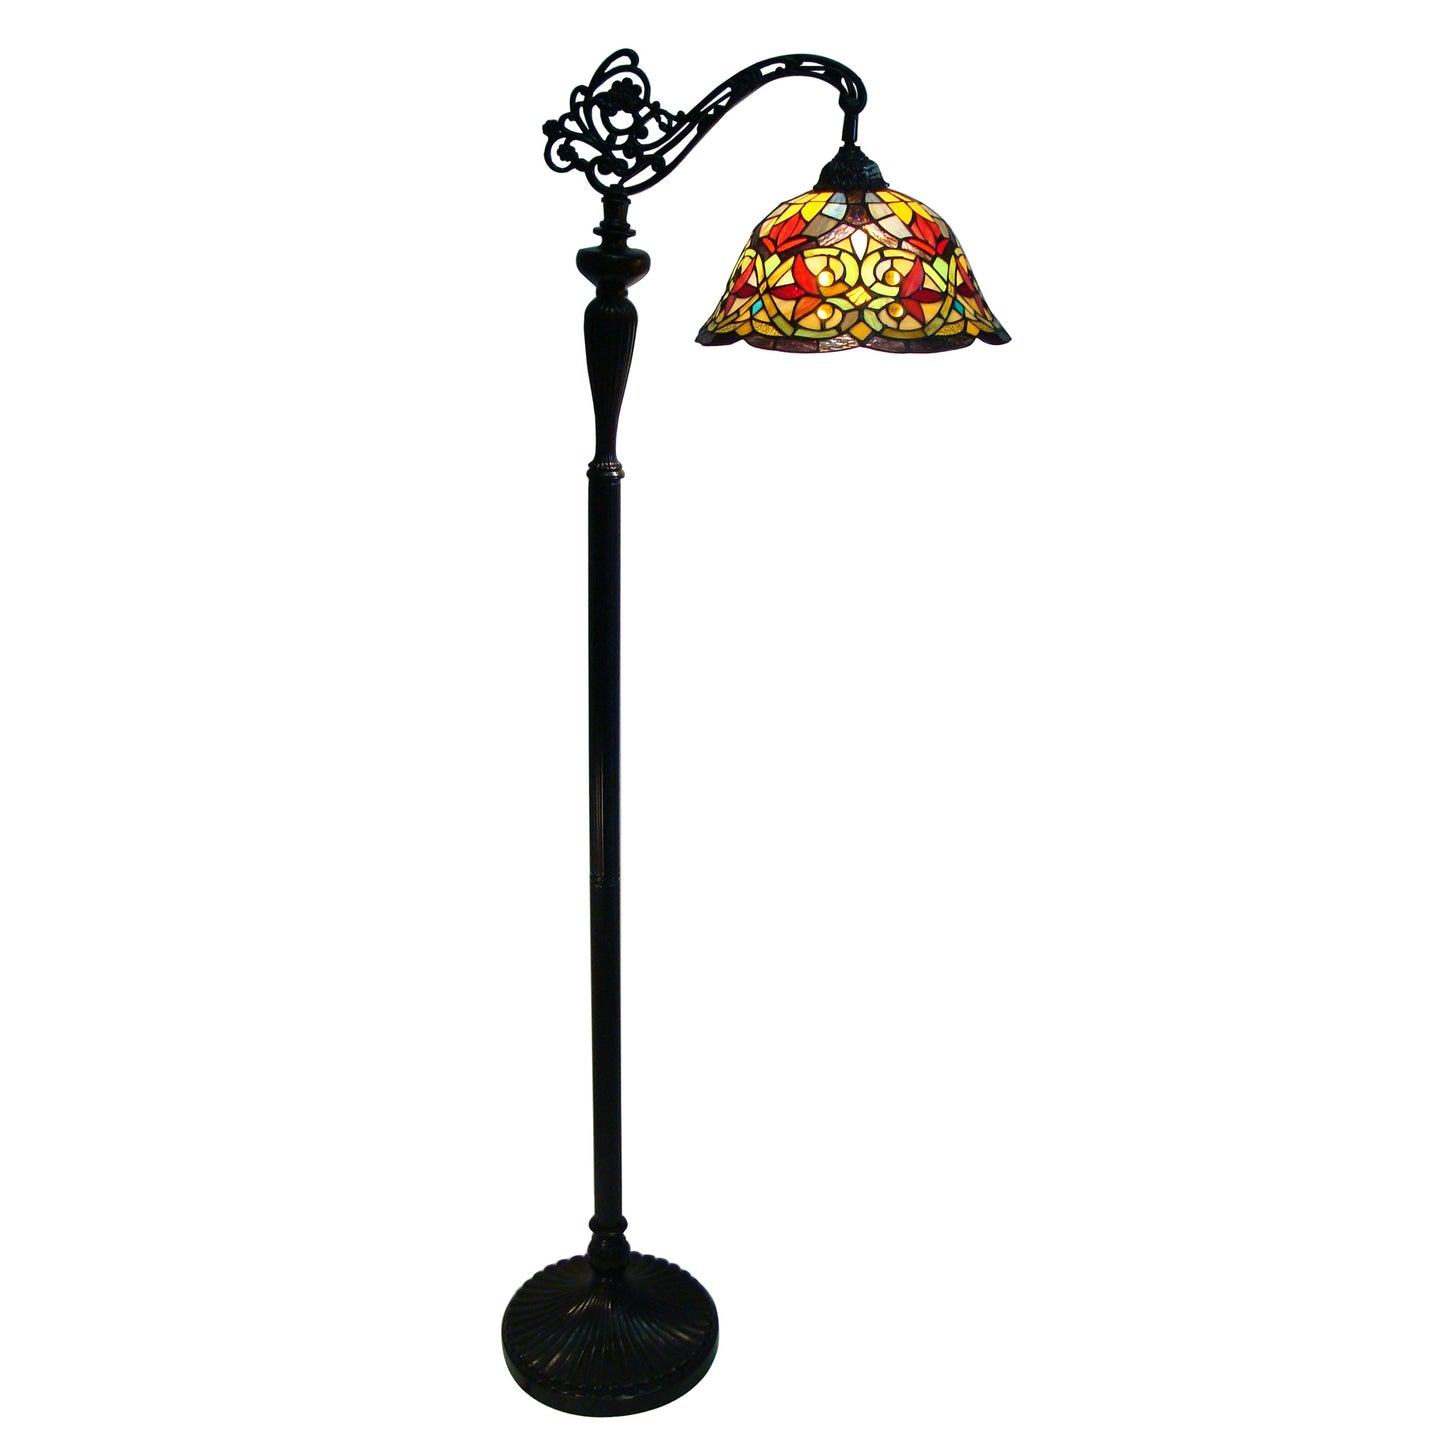 Verona Tiffany Style Stained Glass Arched Floor Lamp, F1220